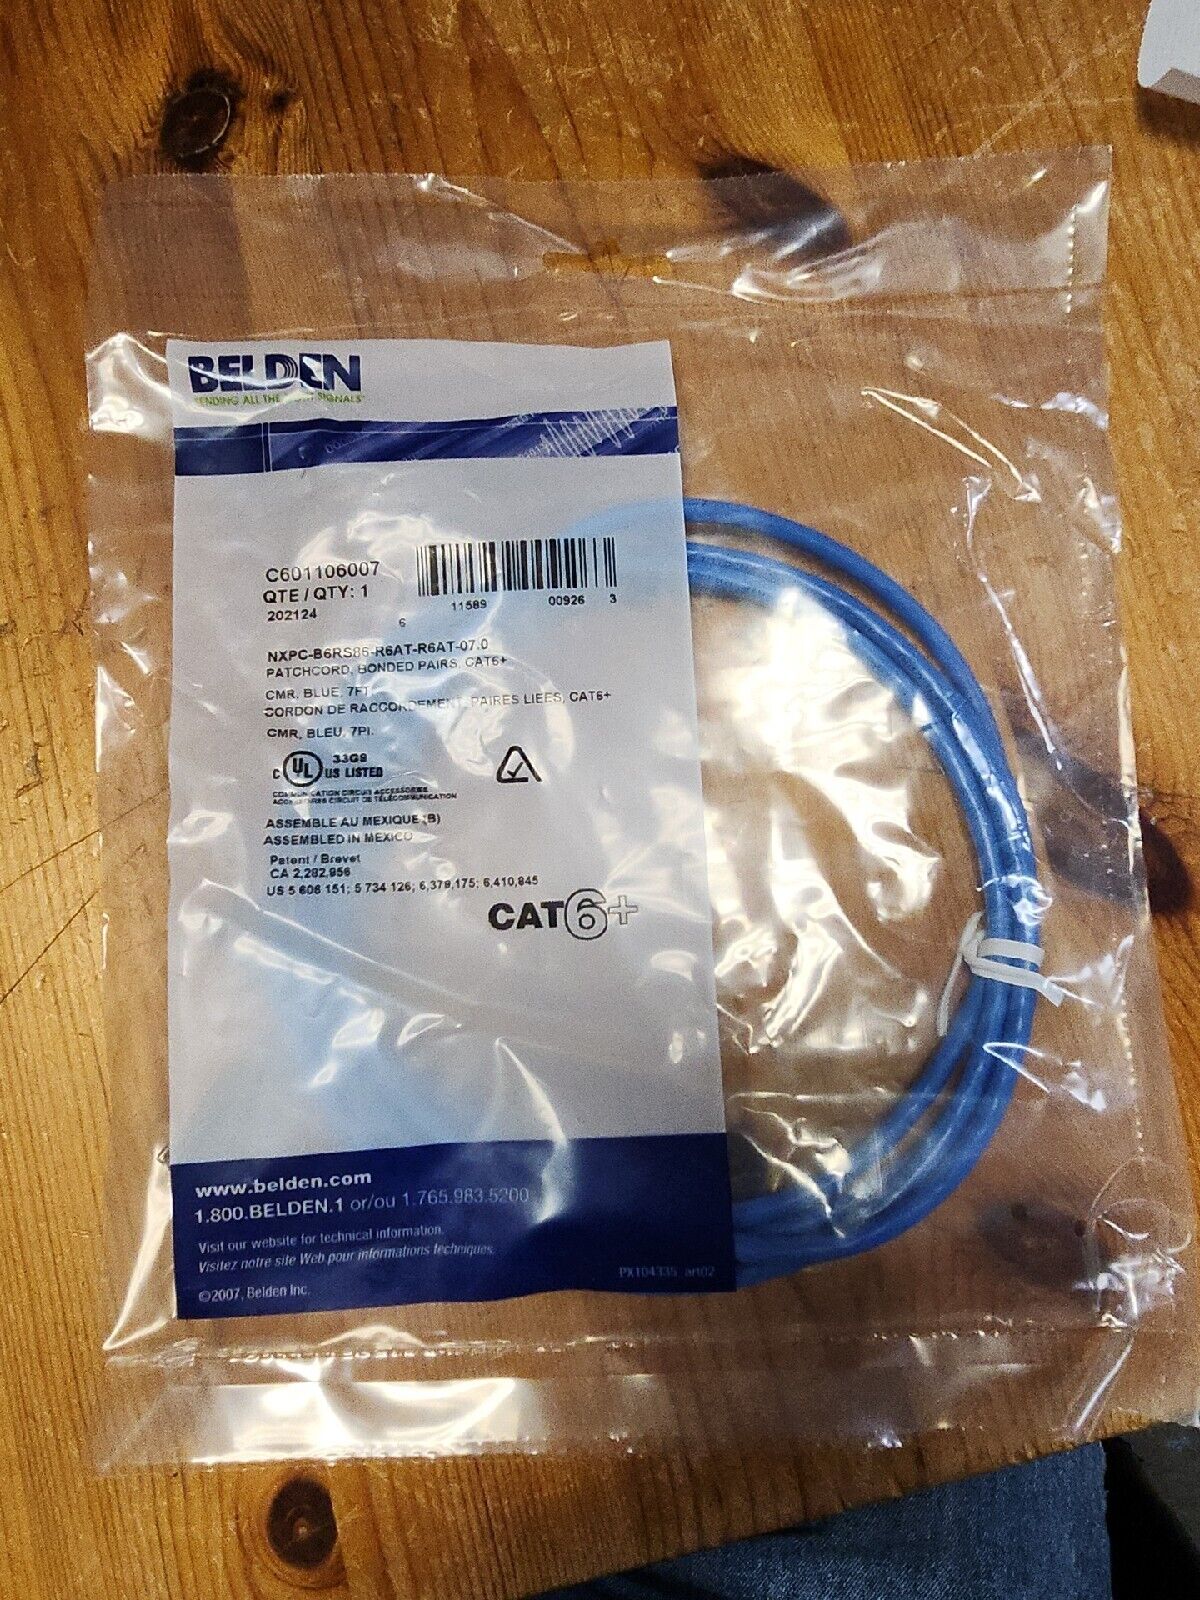 BELDEN CAT6+ Patch Cord, Bonded-Pair, 4 Pair, 24 AWG Solid, CMR, Blue, 7 ft.